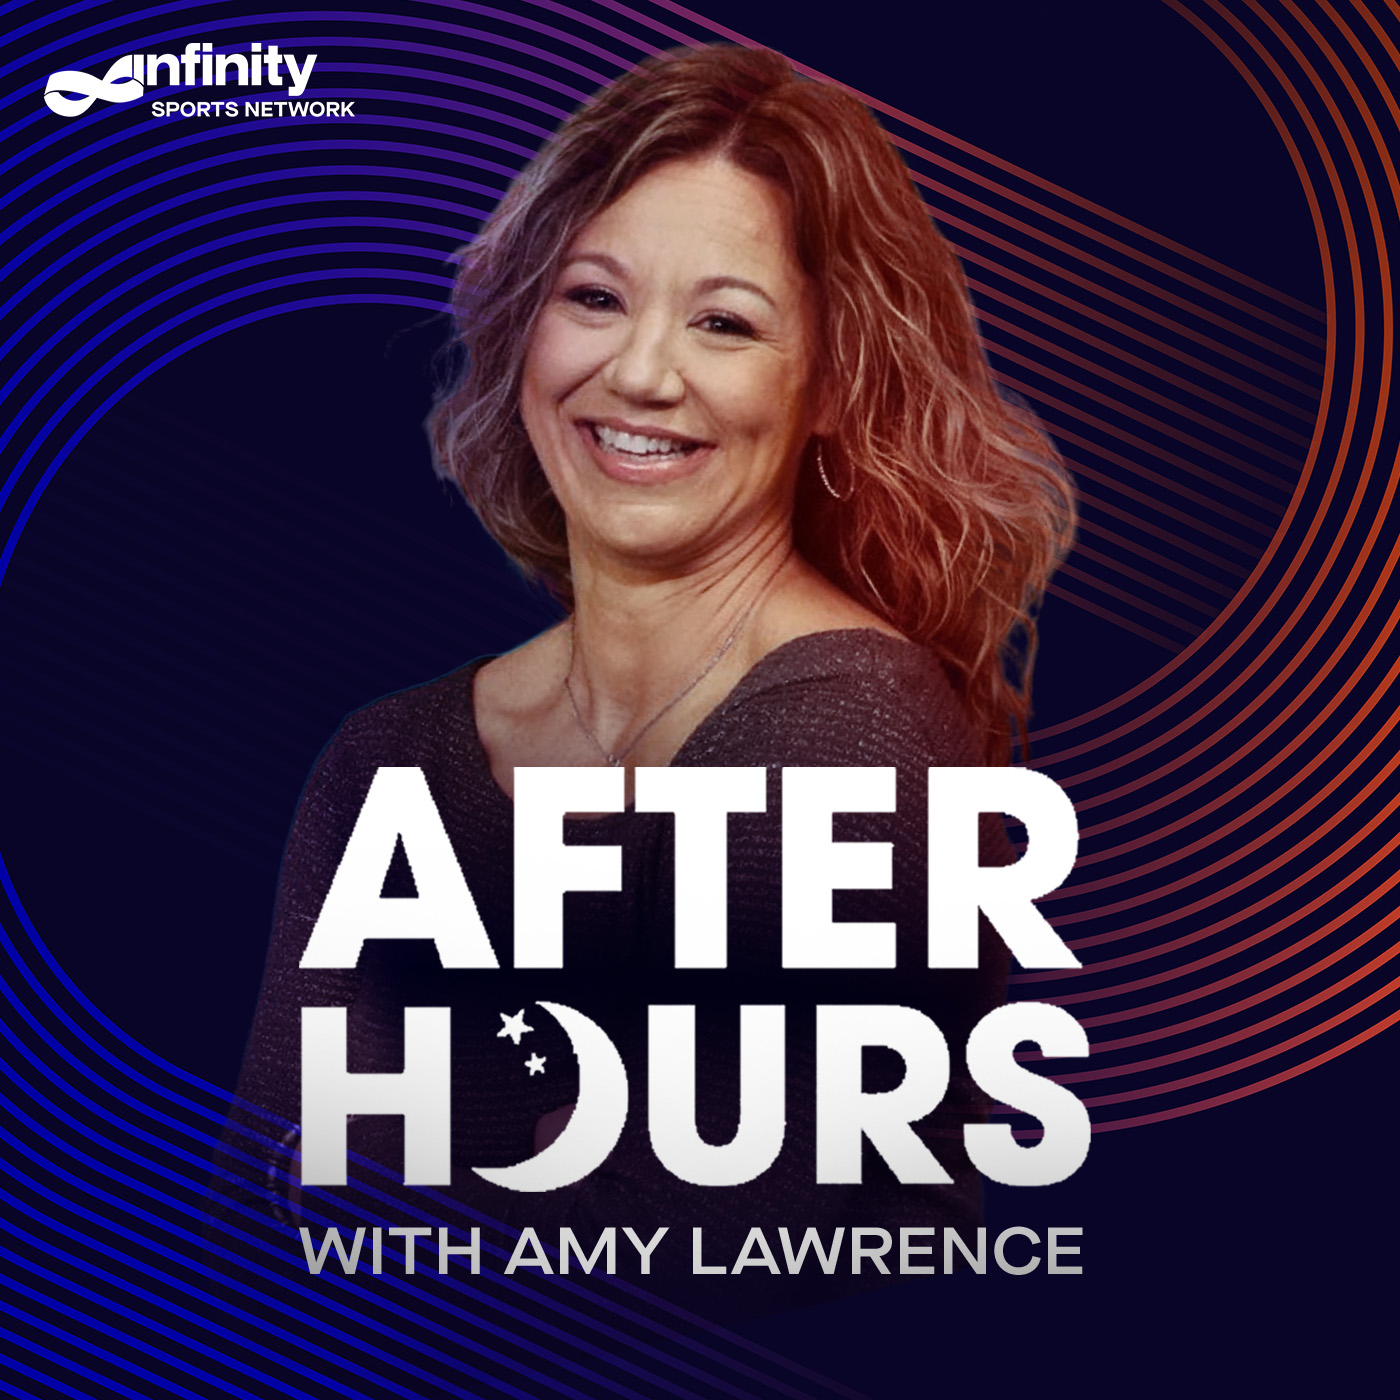 11-29-21 After Hours with Amy Lawrence PODCAST: Hour 1